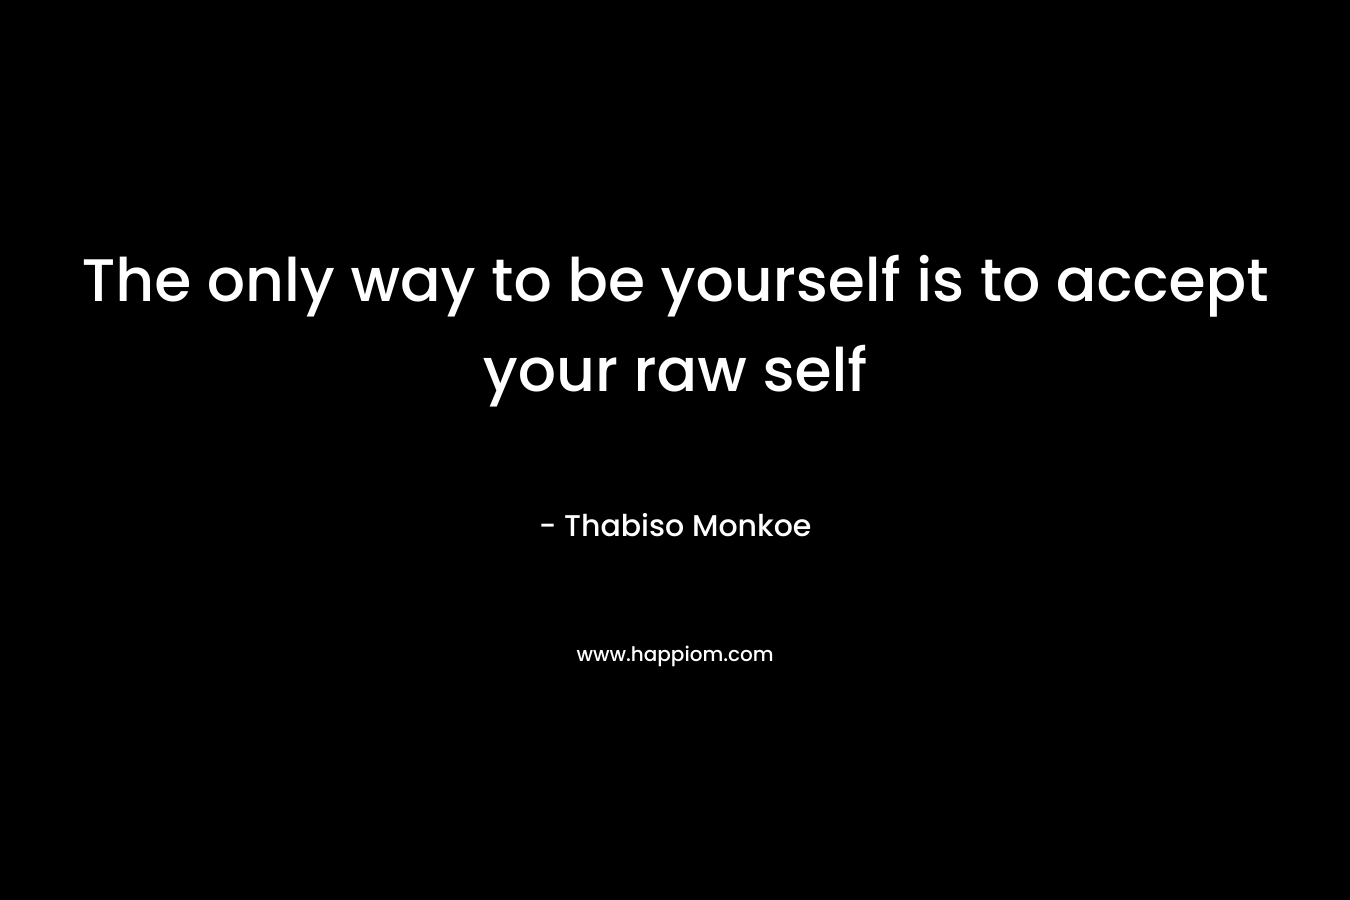 The only way to be yourself is to accept your raw self